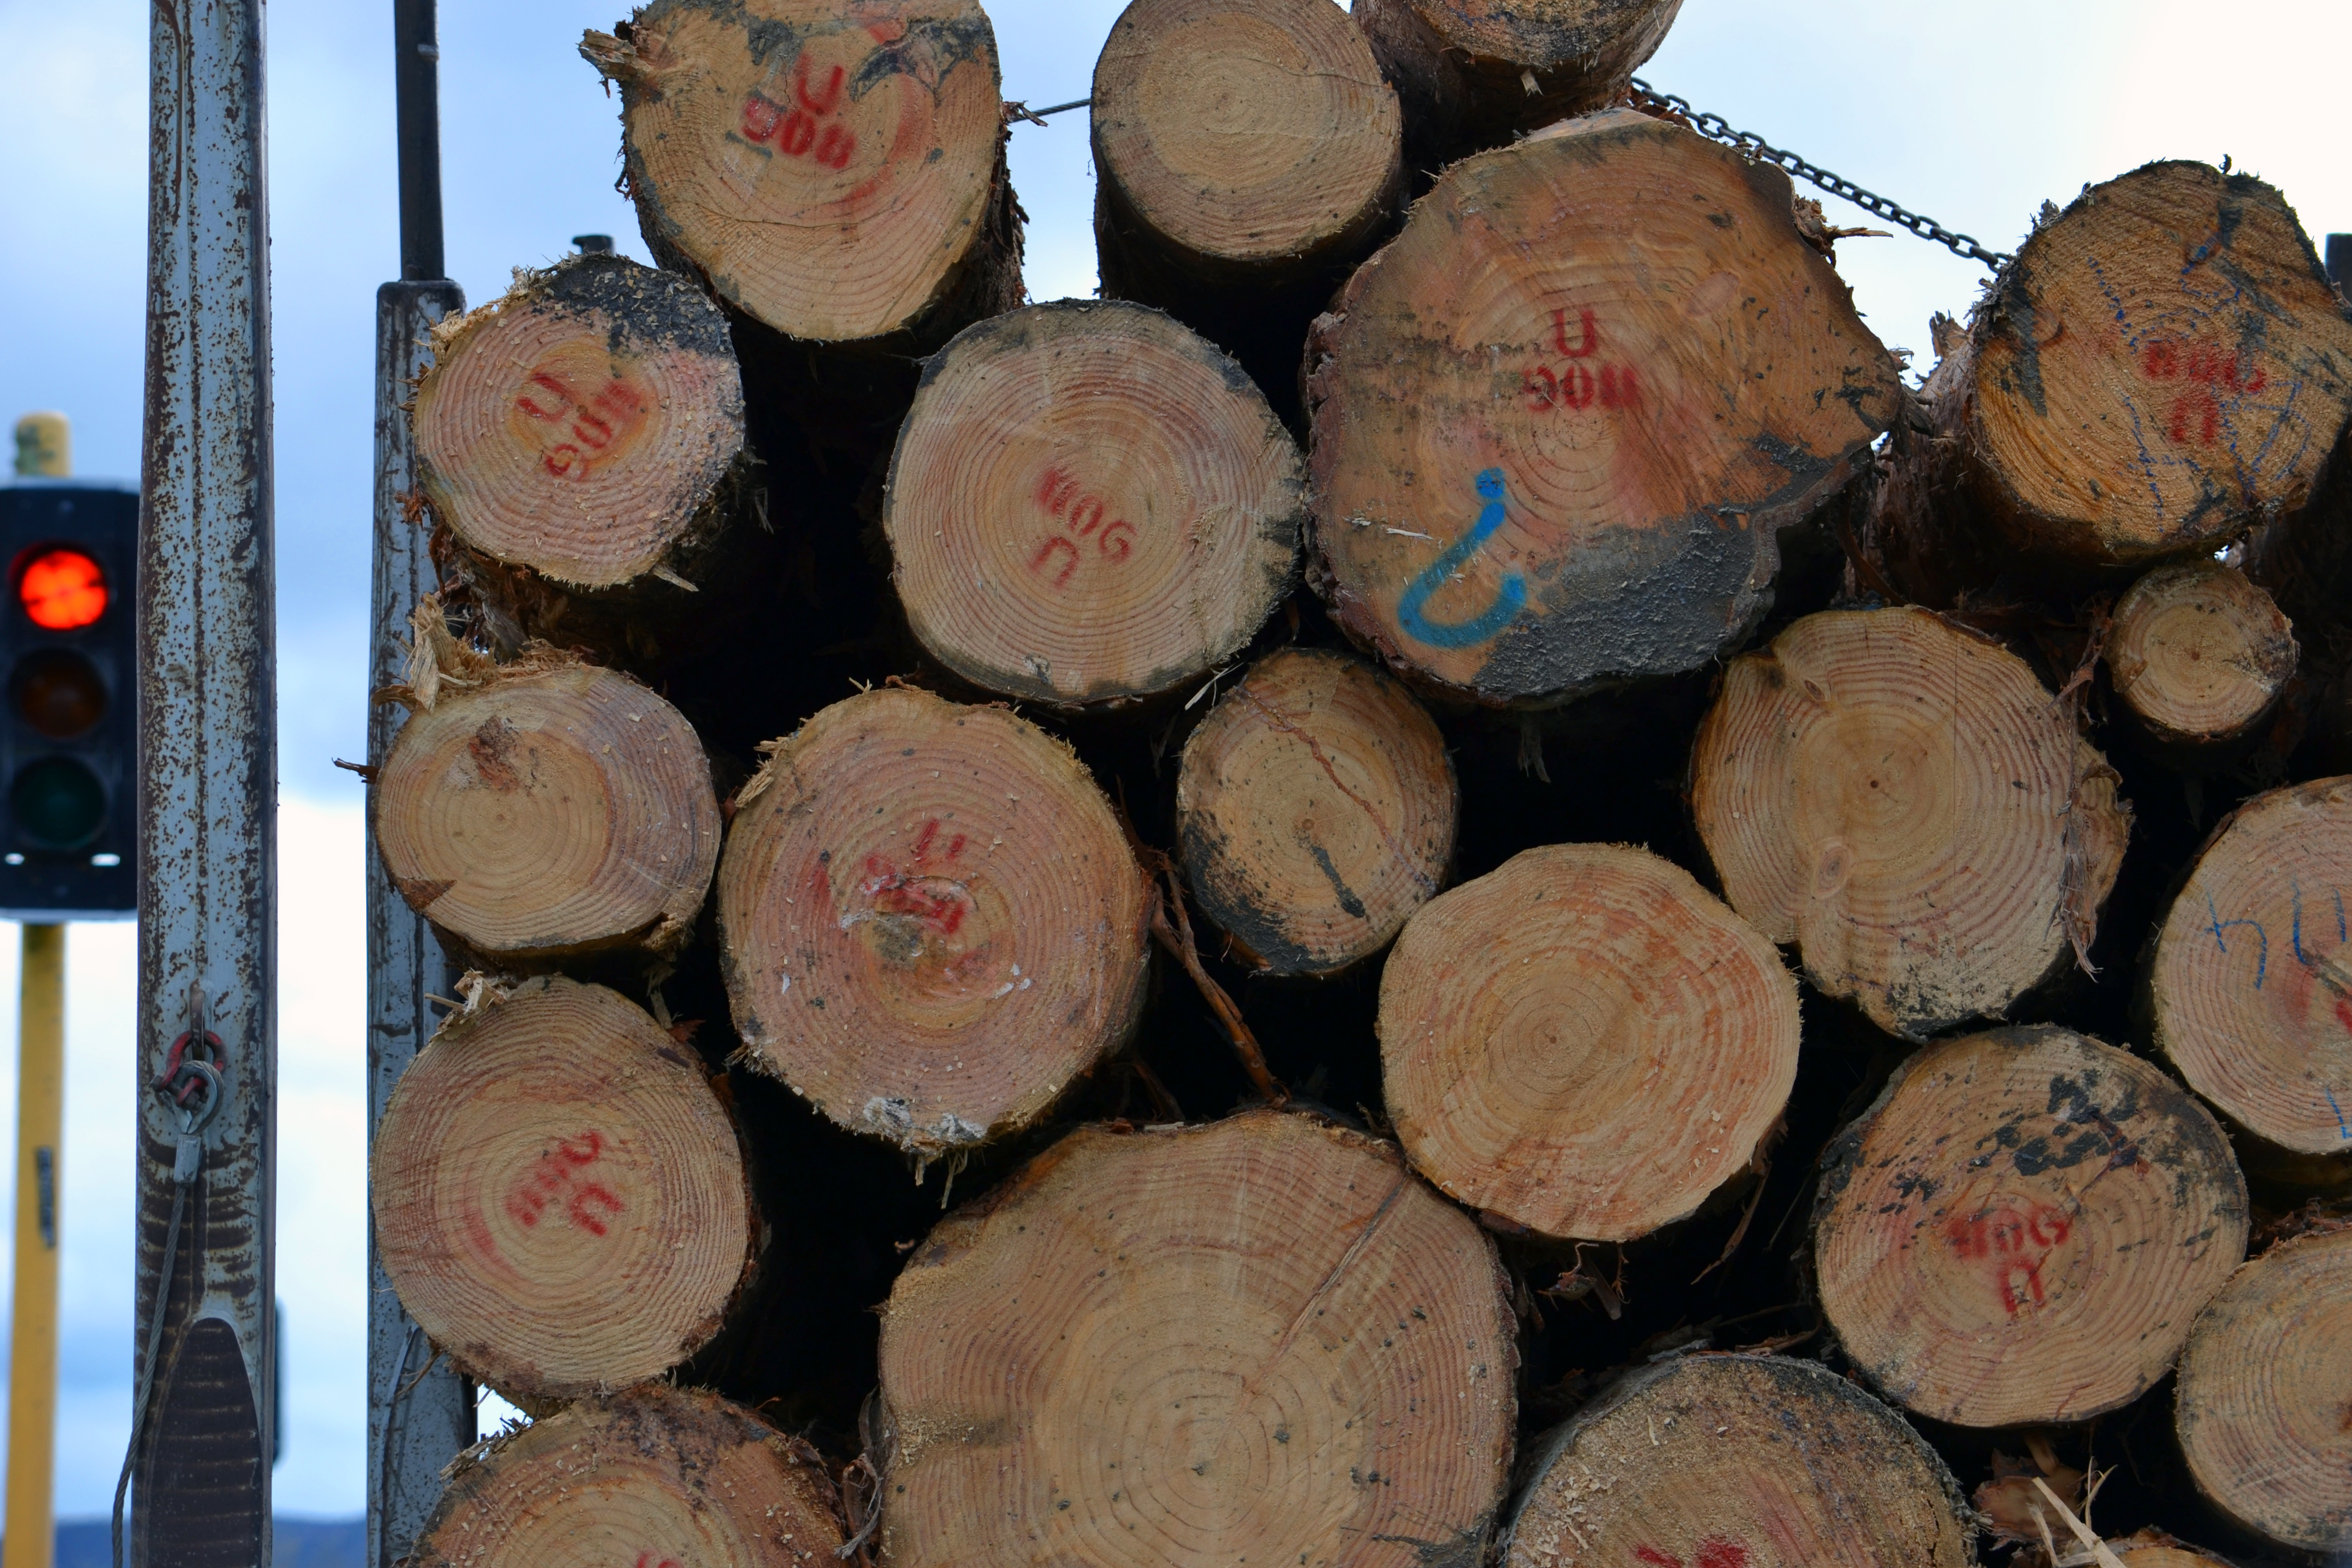 Identifying wood is the first step to fighting deforestation driven by crime. Photo by WRI/Flickr